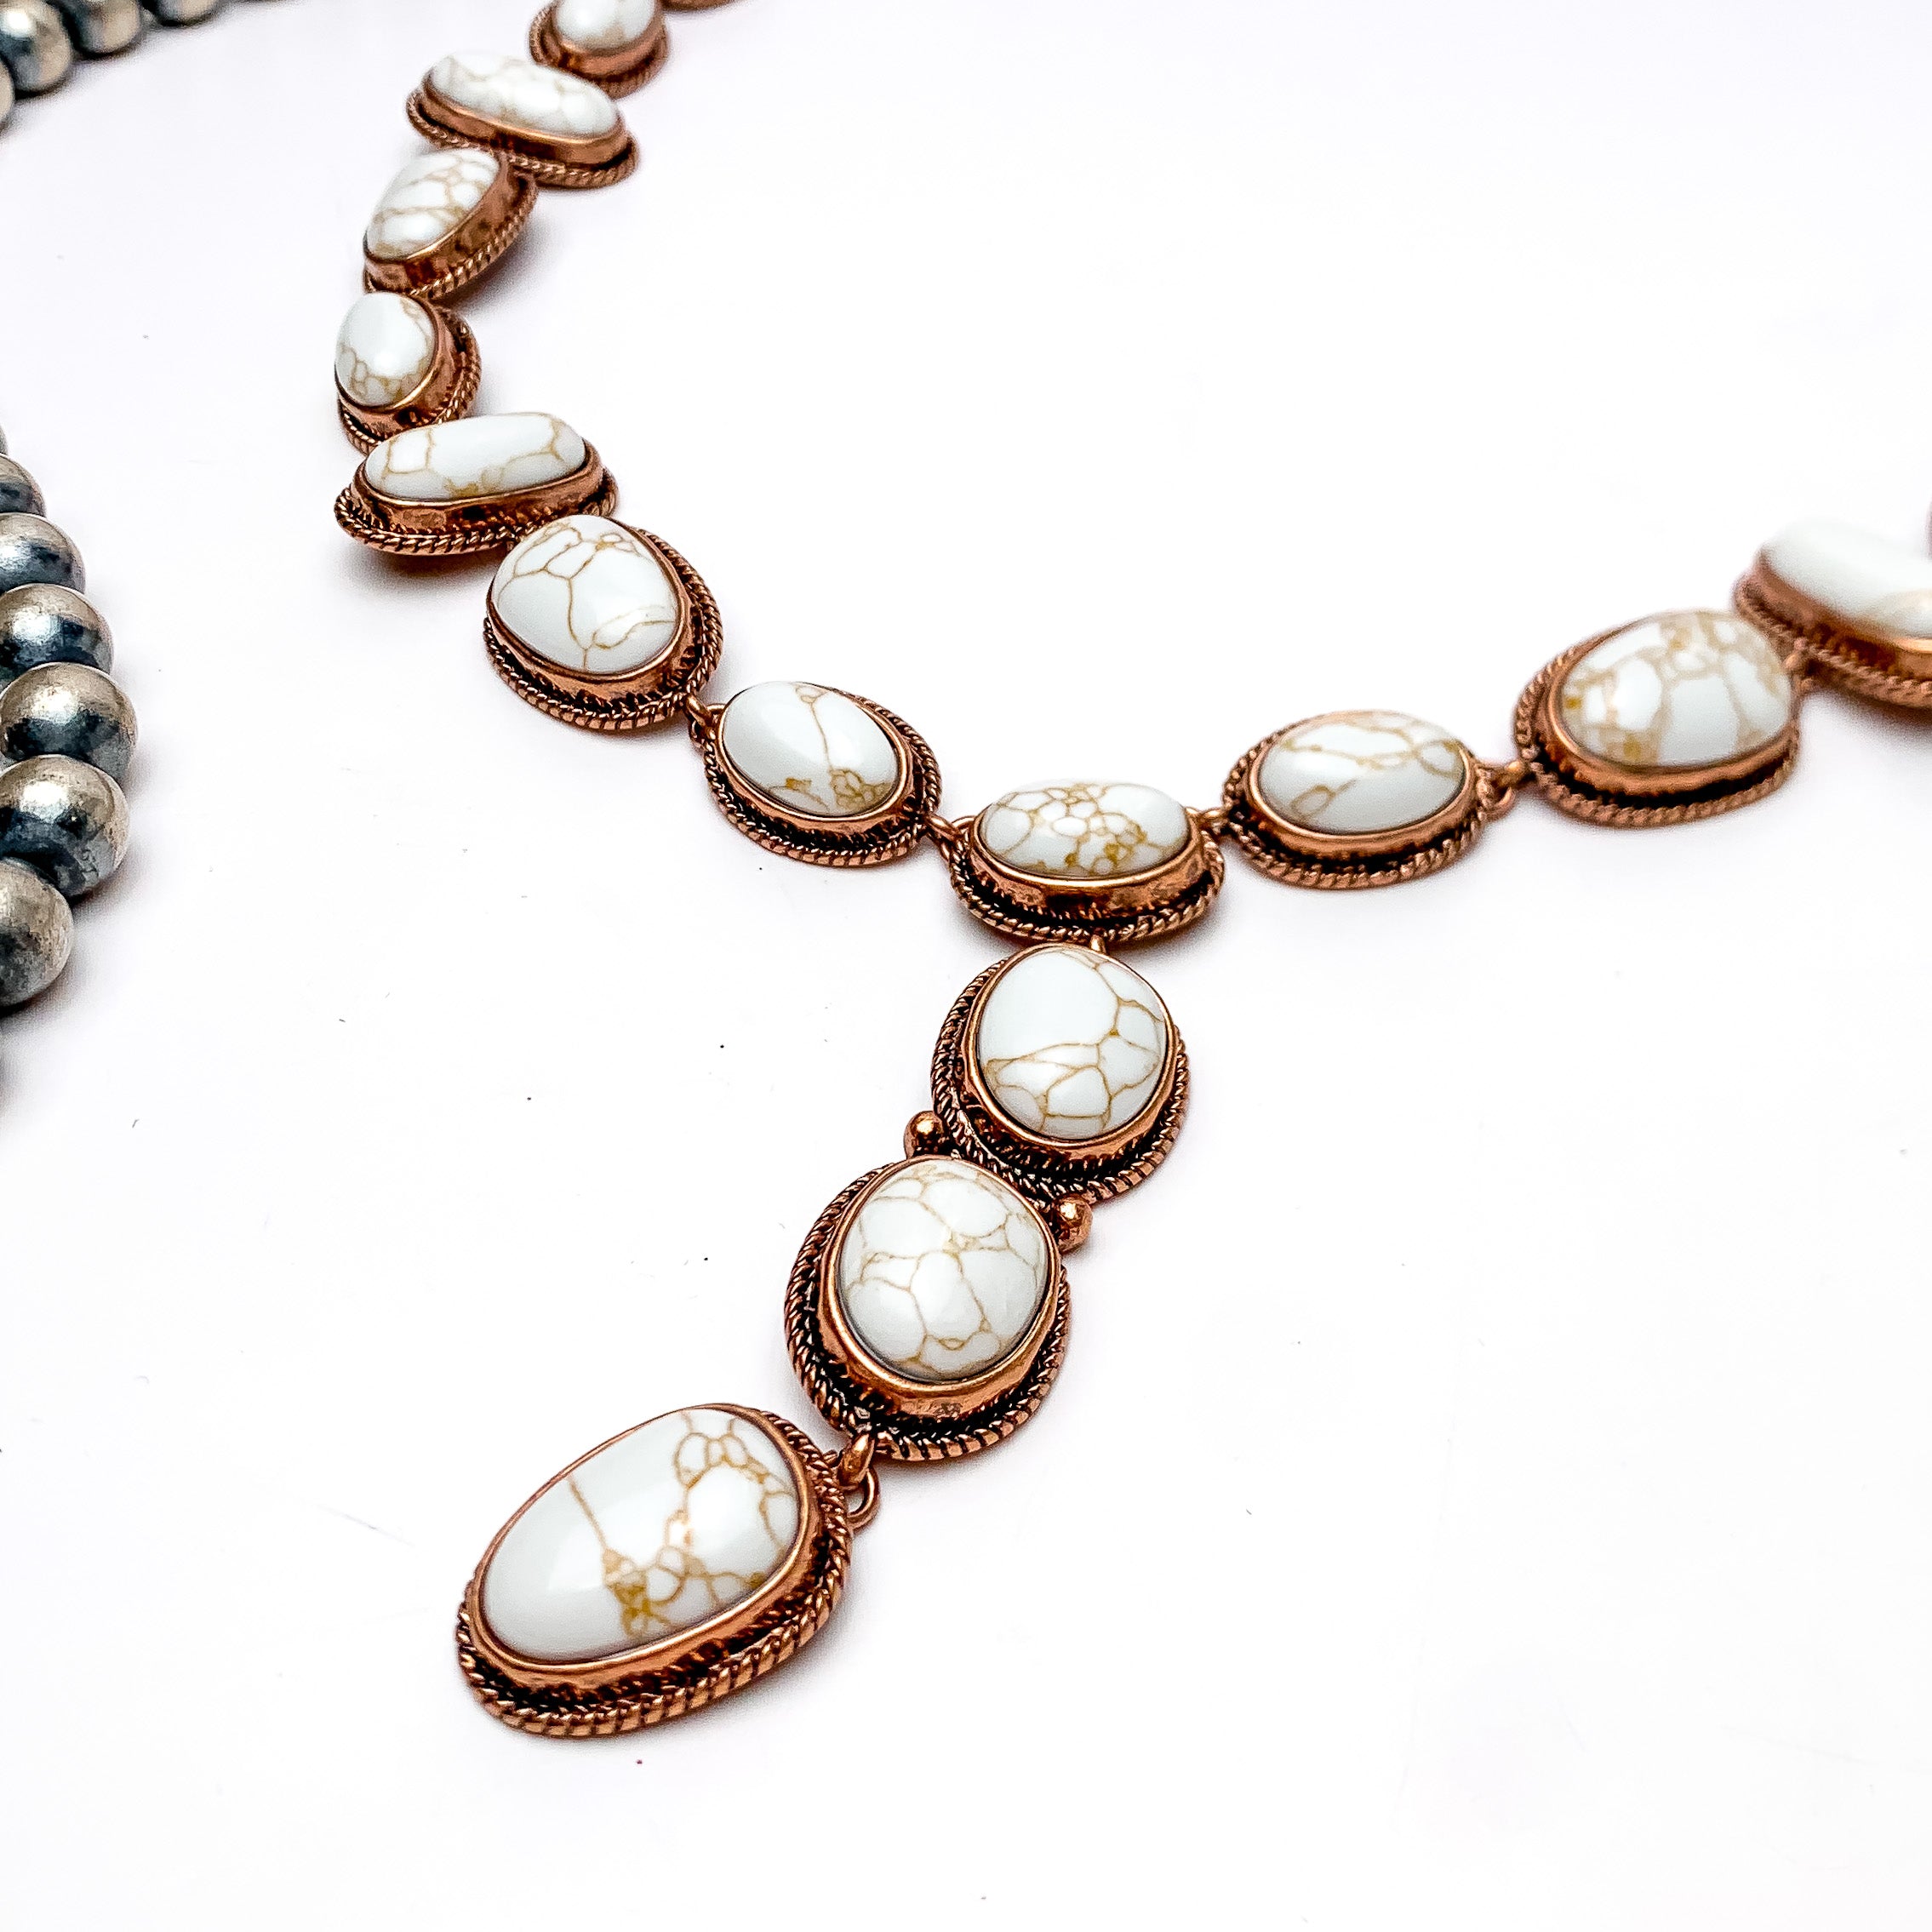 Western Stone Lariat Necklace With Ivory Stones - Giddy Up Glamour Boutique